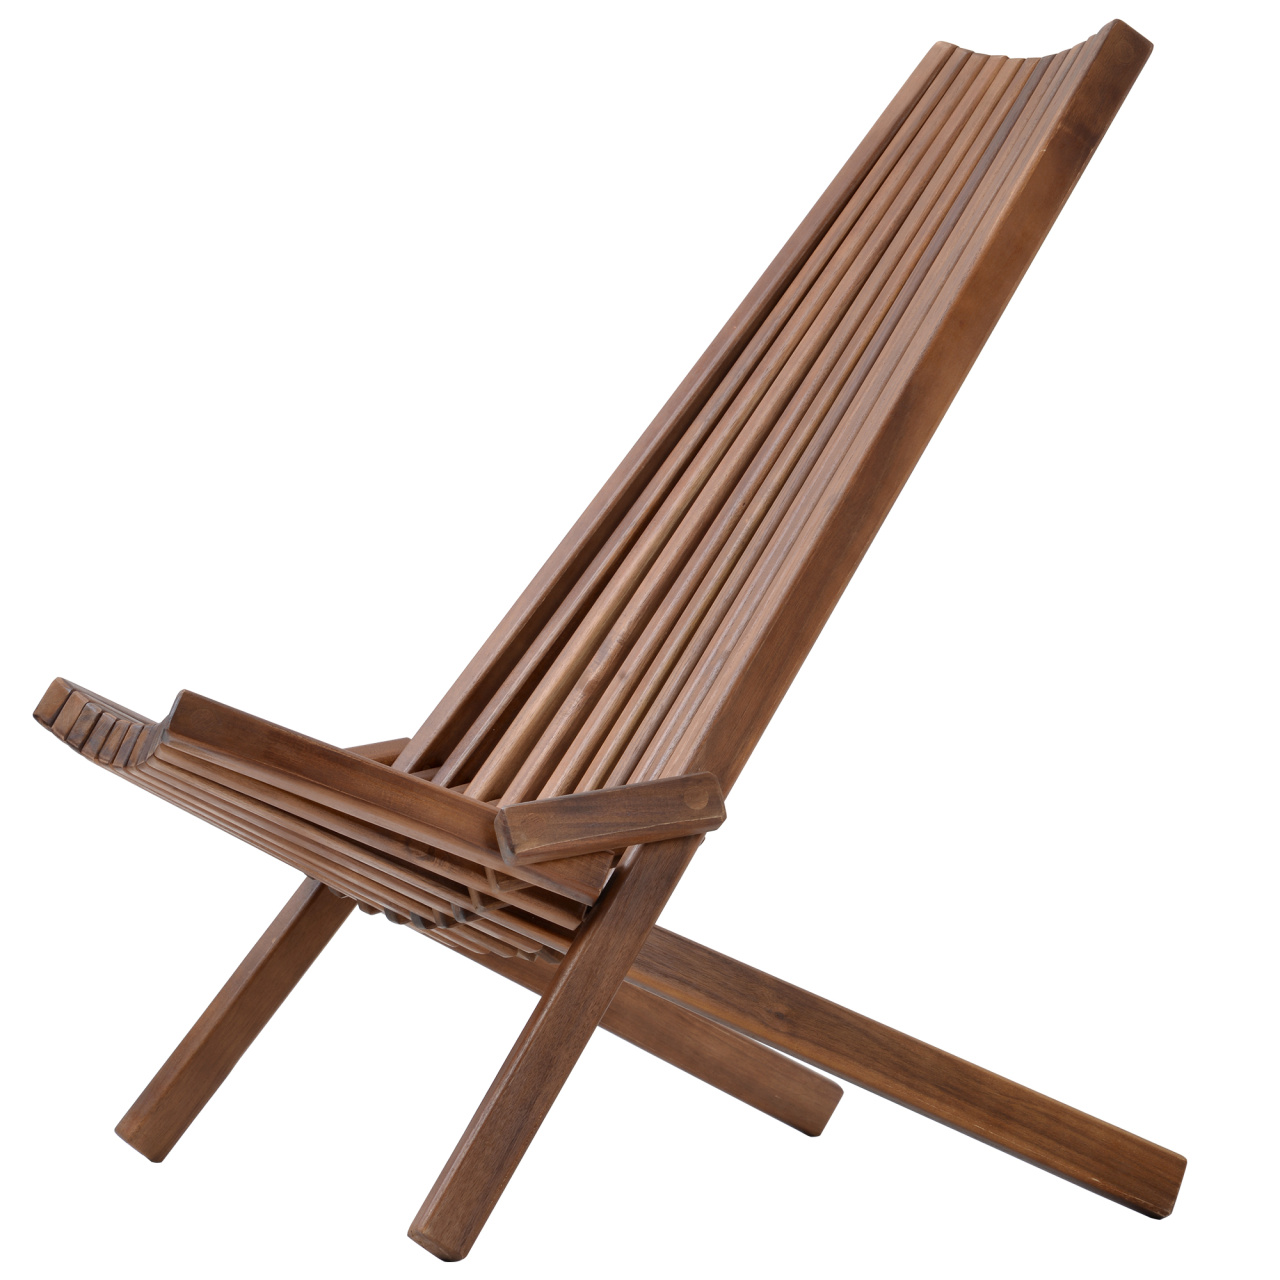 Folding Wood Chair Portable Chair with Ergonomic Seat and Tall Slanted Back, Outdoor/Indoor Chair Garden Chair Beach Chaise Lounge Chair Camping Recliner, Pool Chair Dining Chair - image 3 of 9